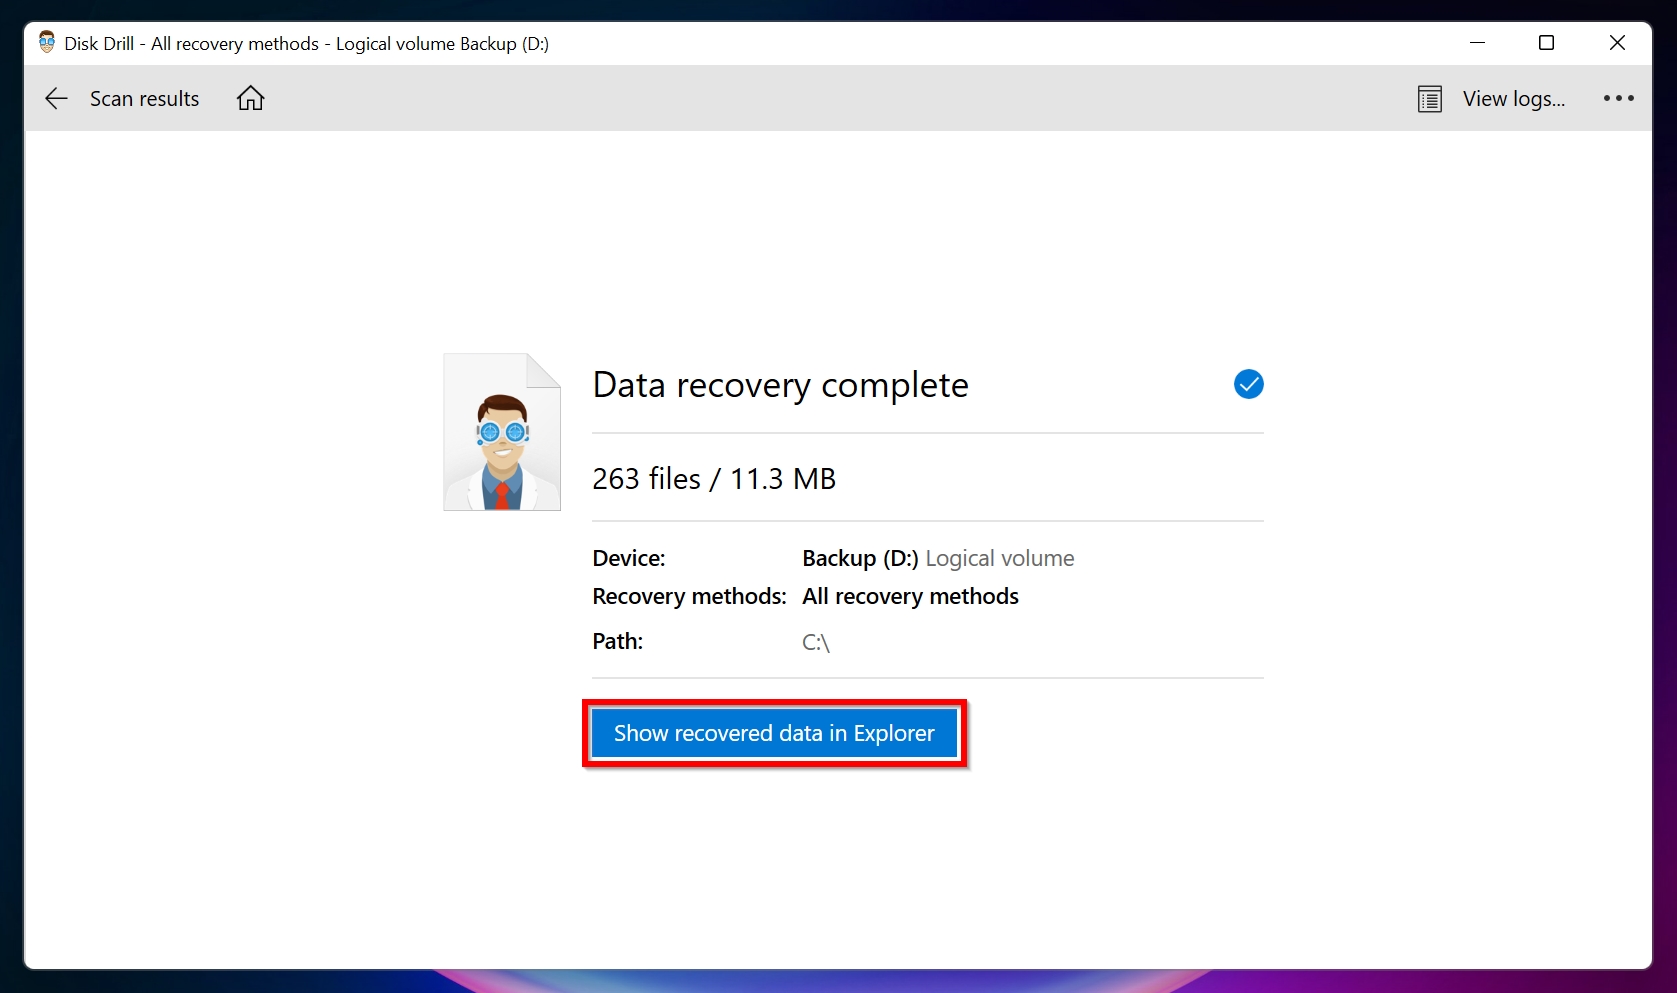 File recovery complete screen in Disk Drill.